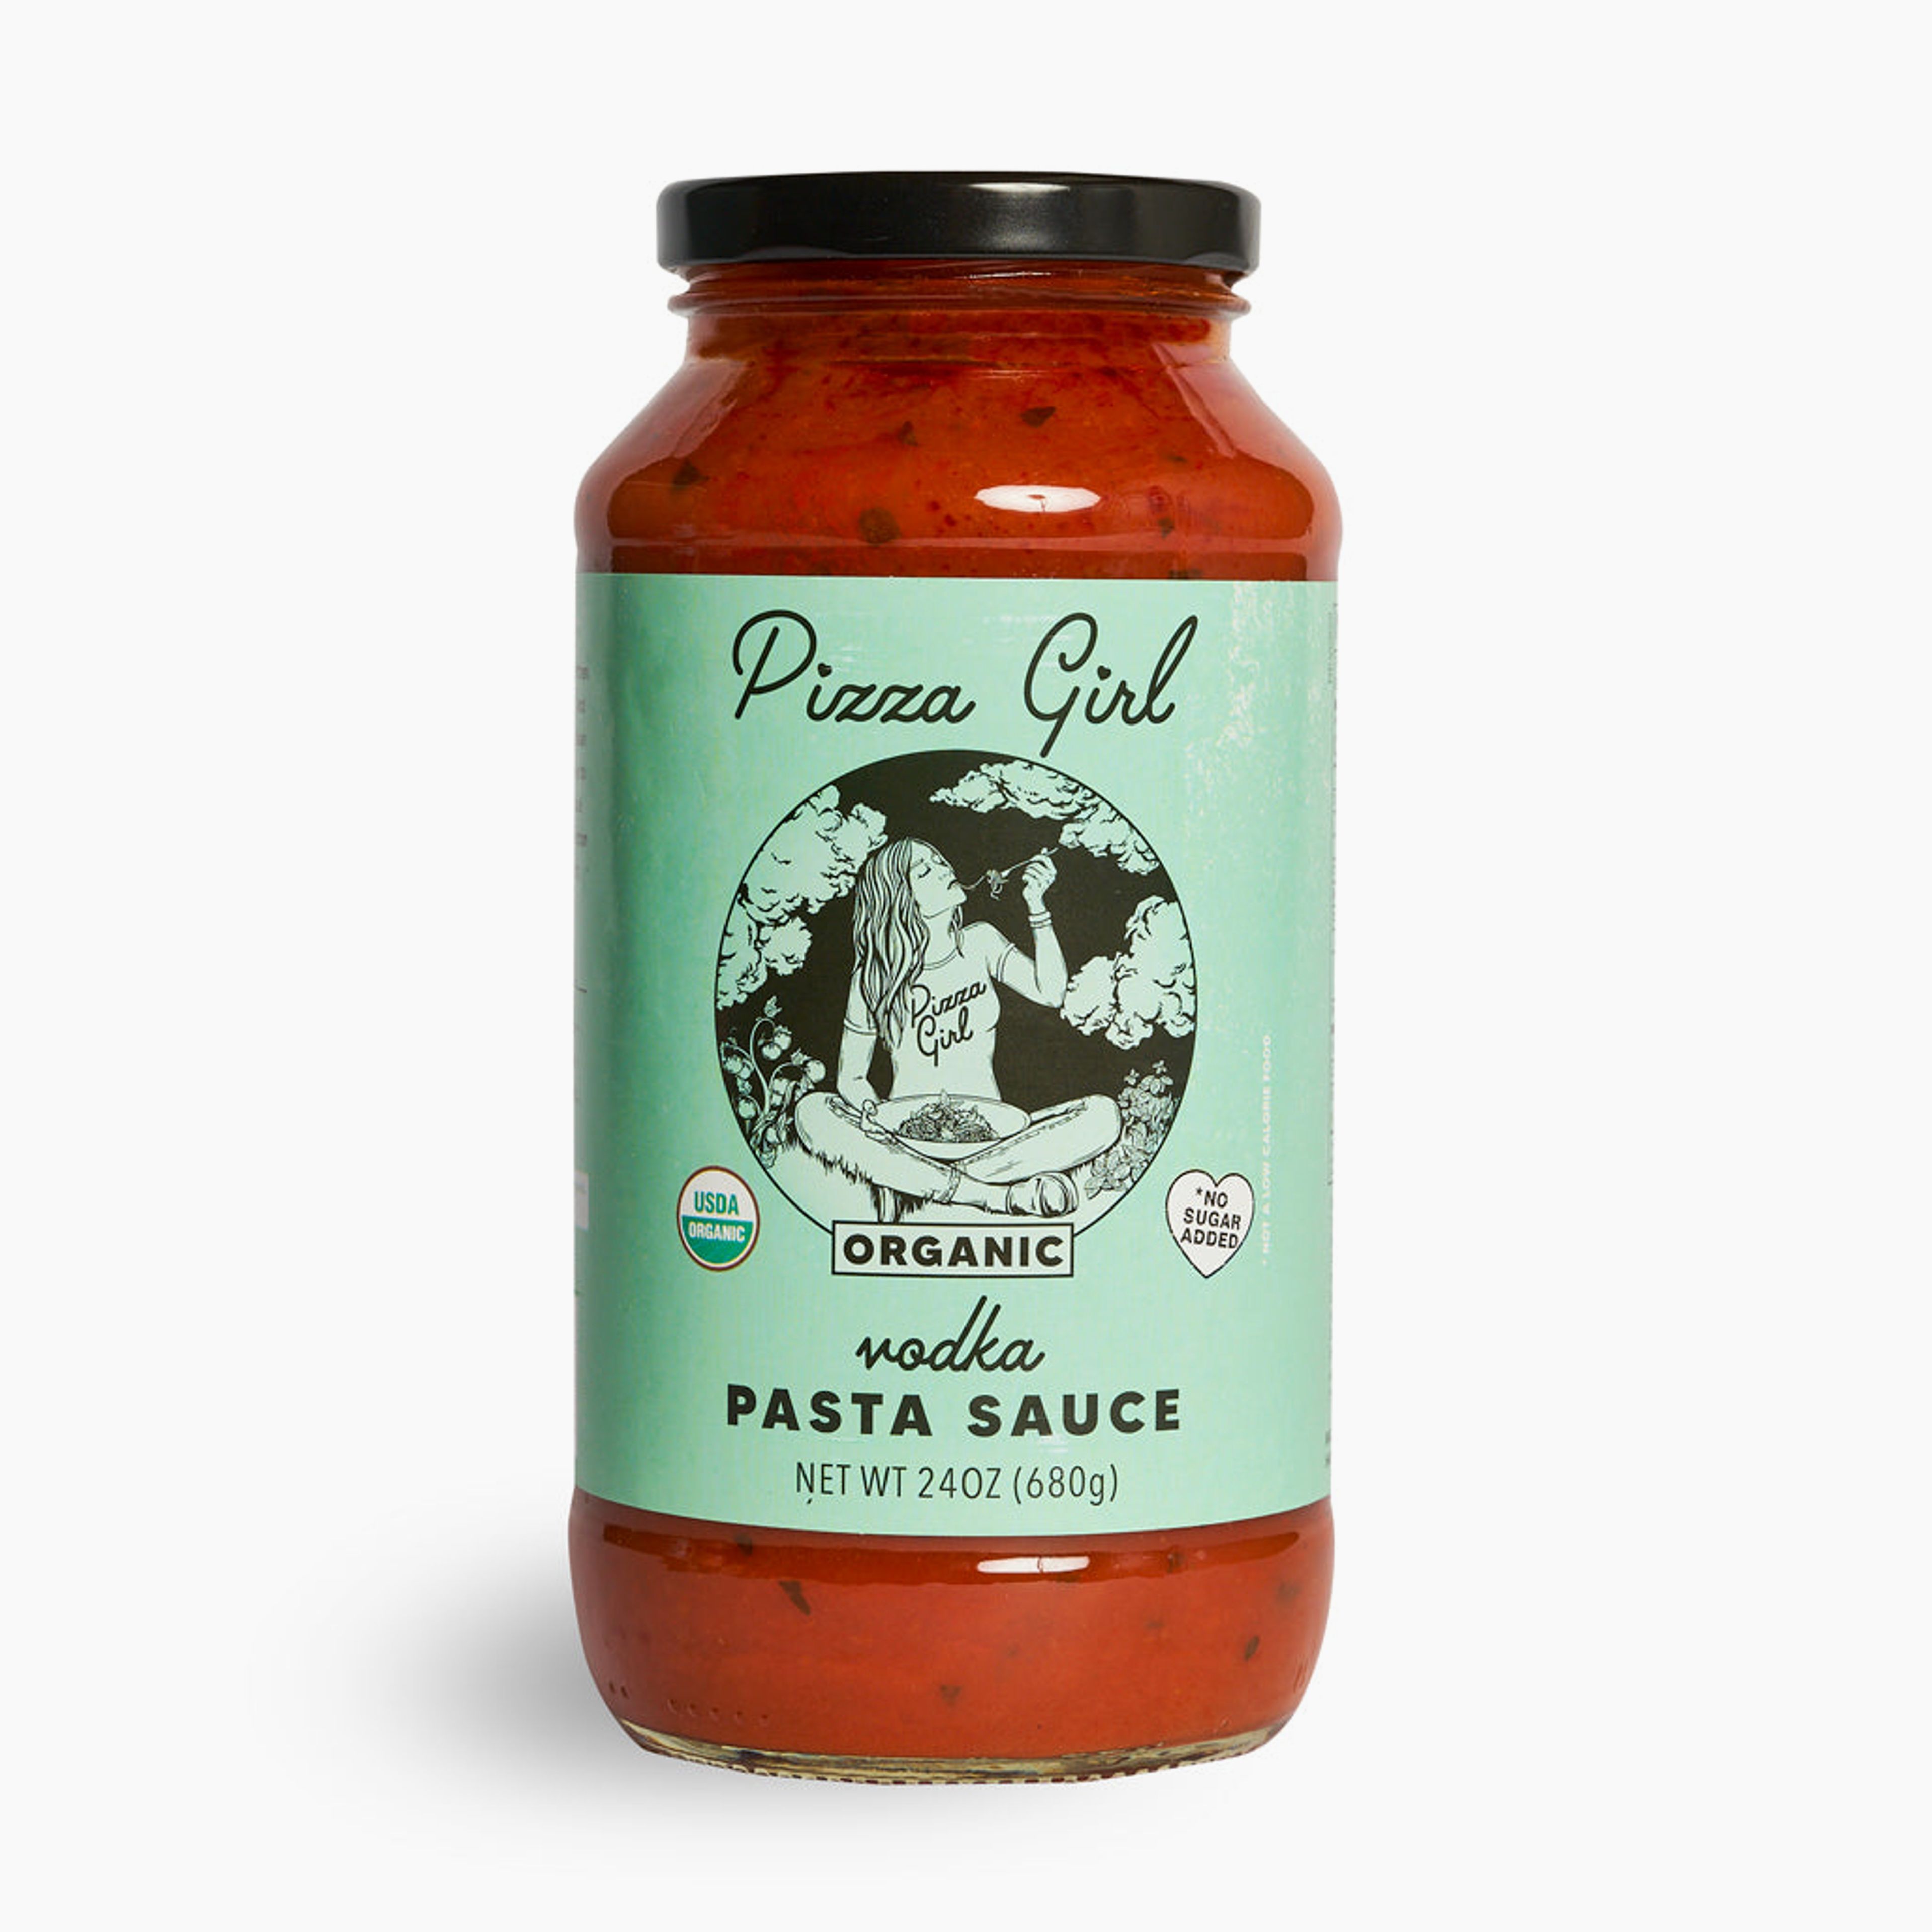 The Ultimate Vodka Sauce Party - 6 Pack